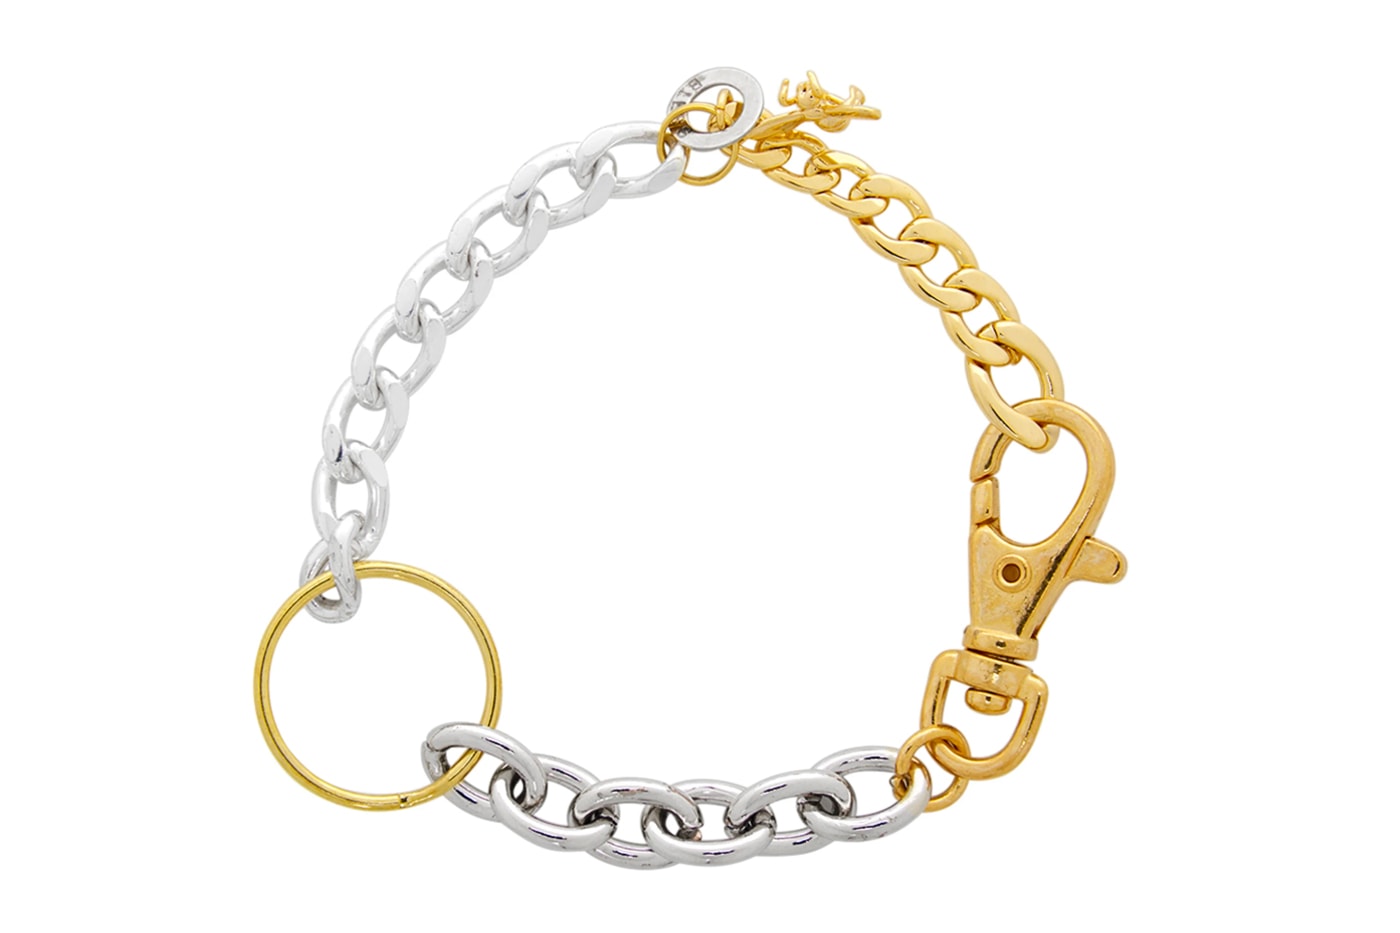 BLESS Materialmix Bracelet Hairpin Necklace Release Info Buy Price Gold Silver SSENSE